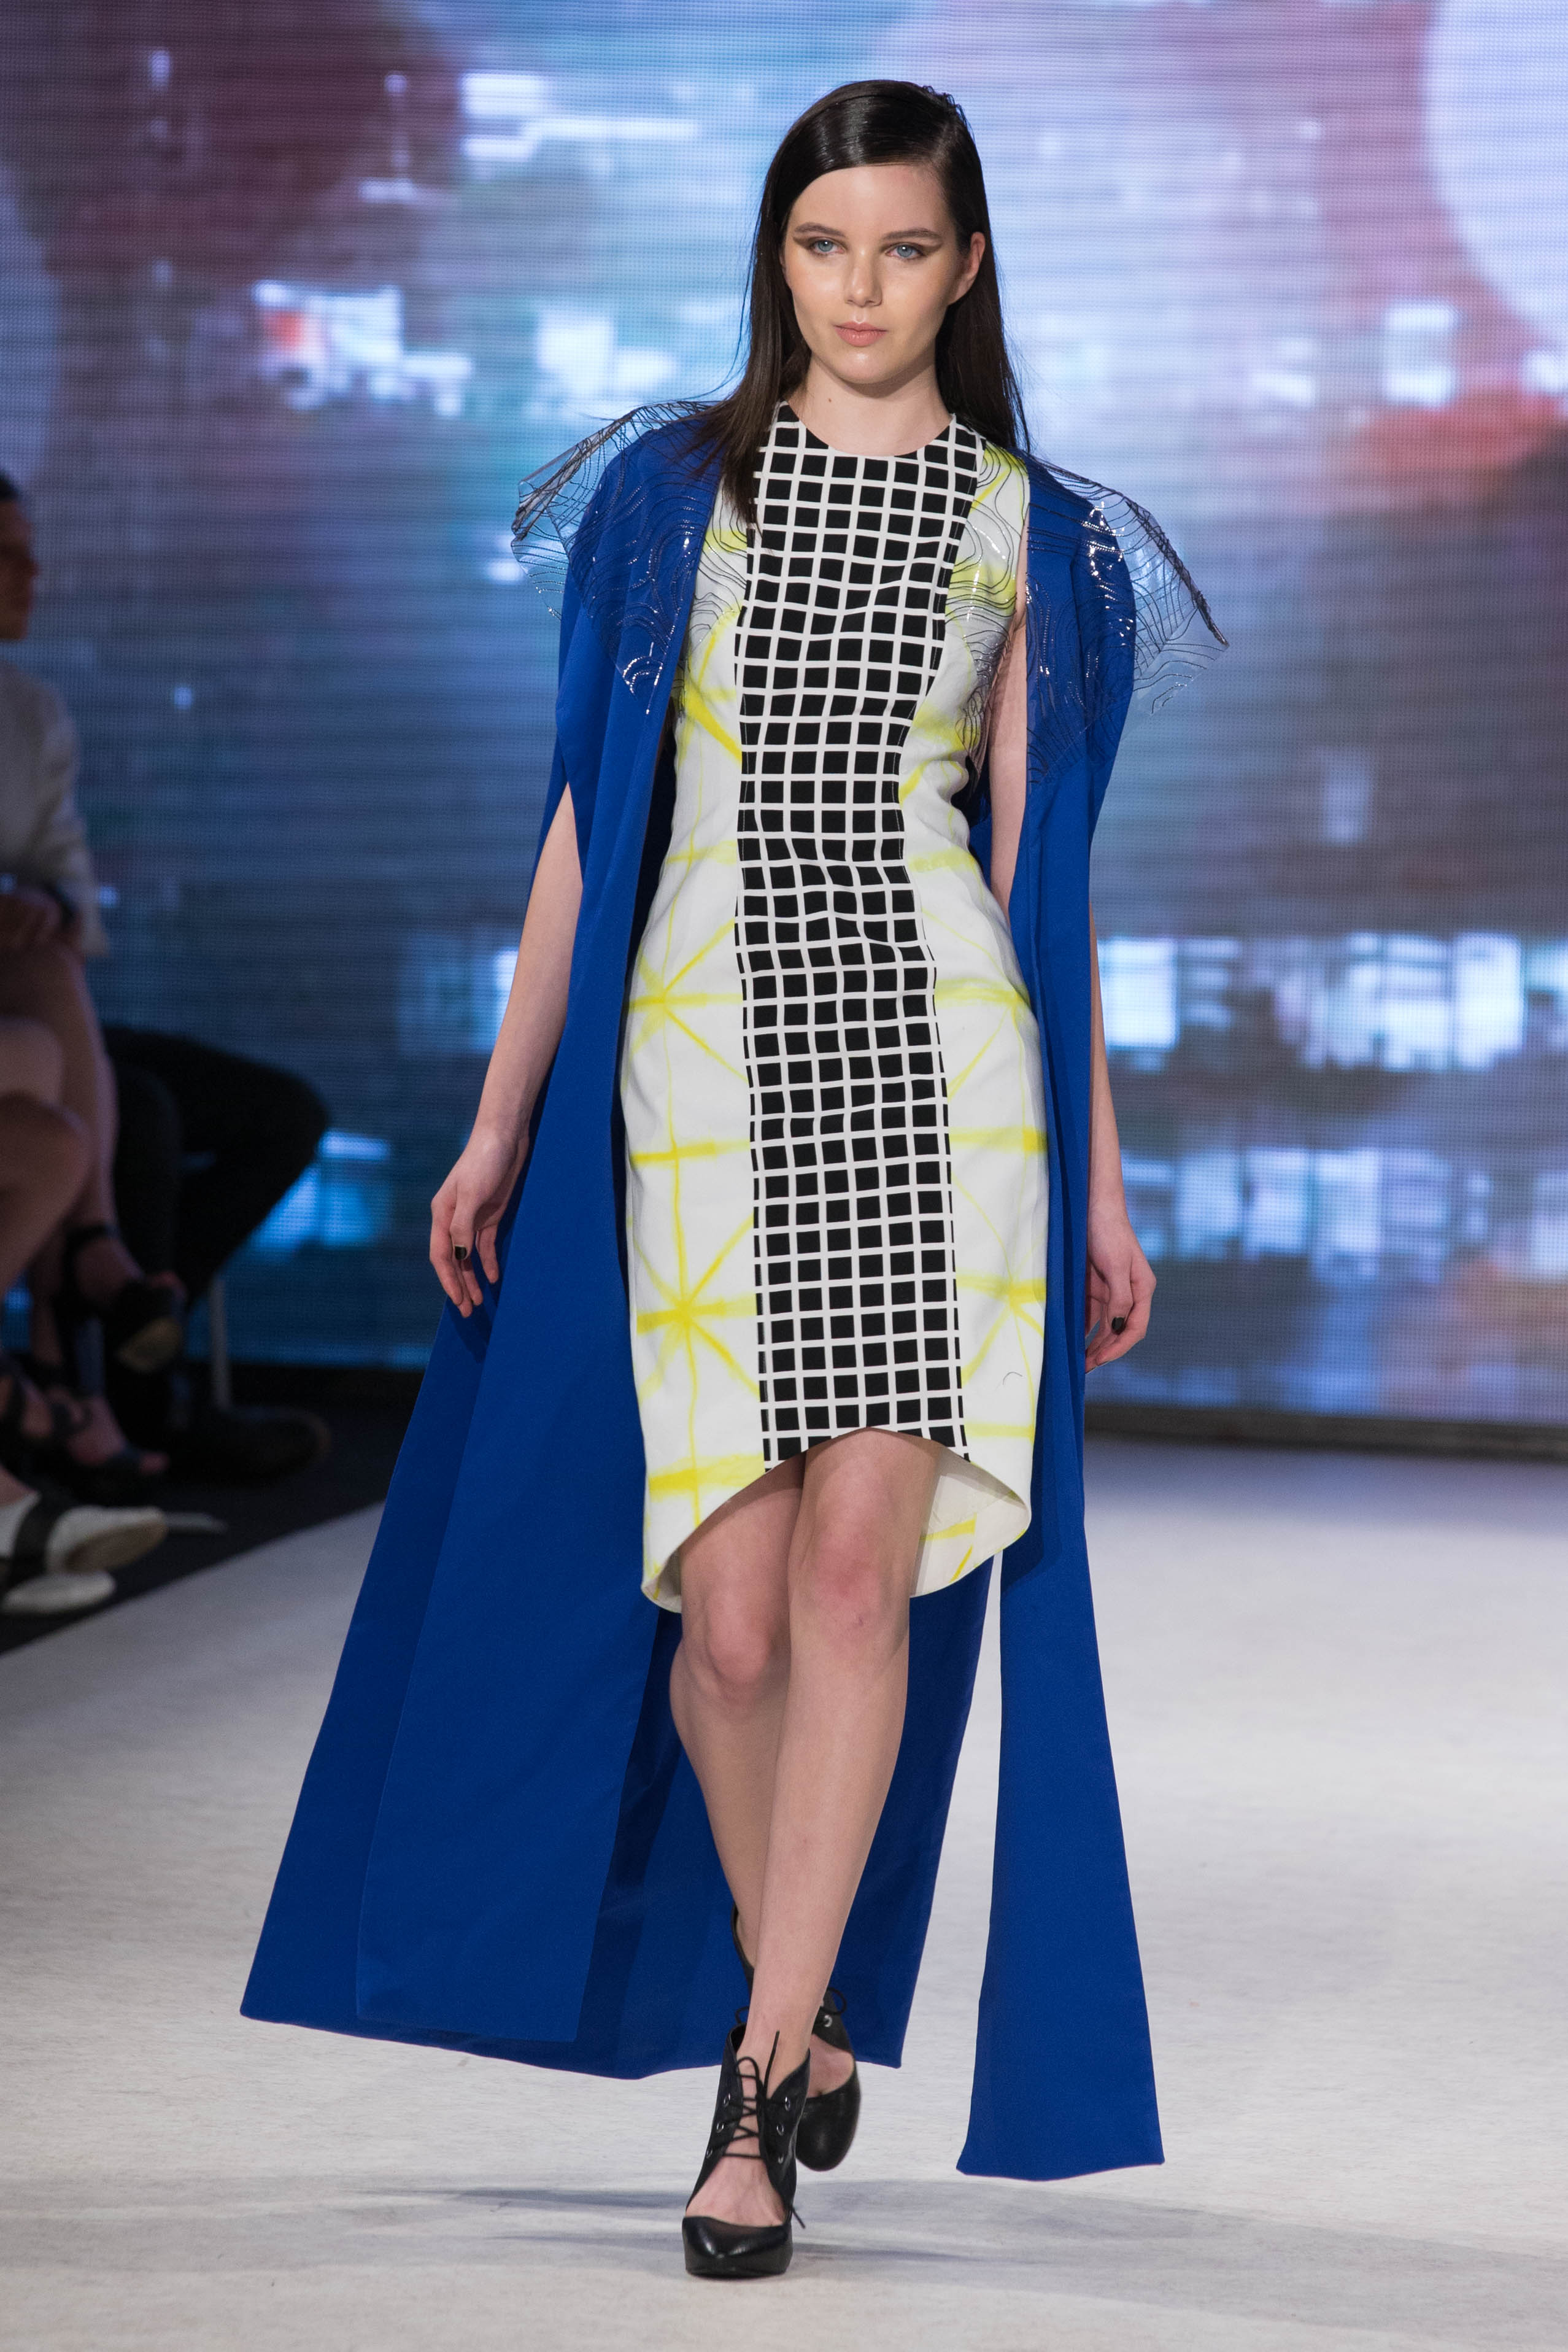 LaSalle College @ Vancouver Fashion Week SS16, Ed Ng Photography